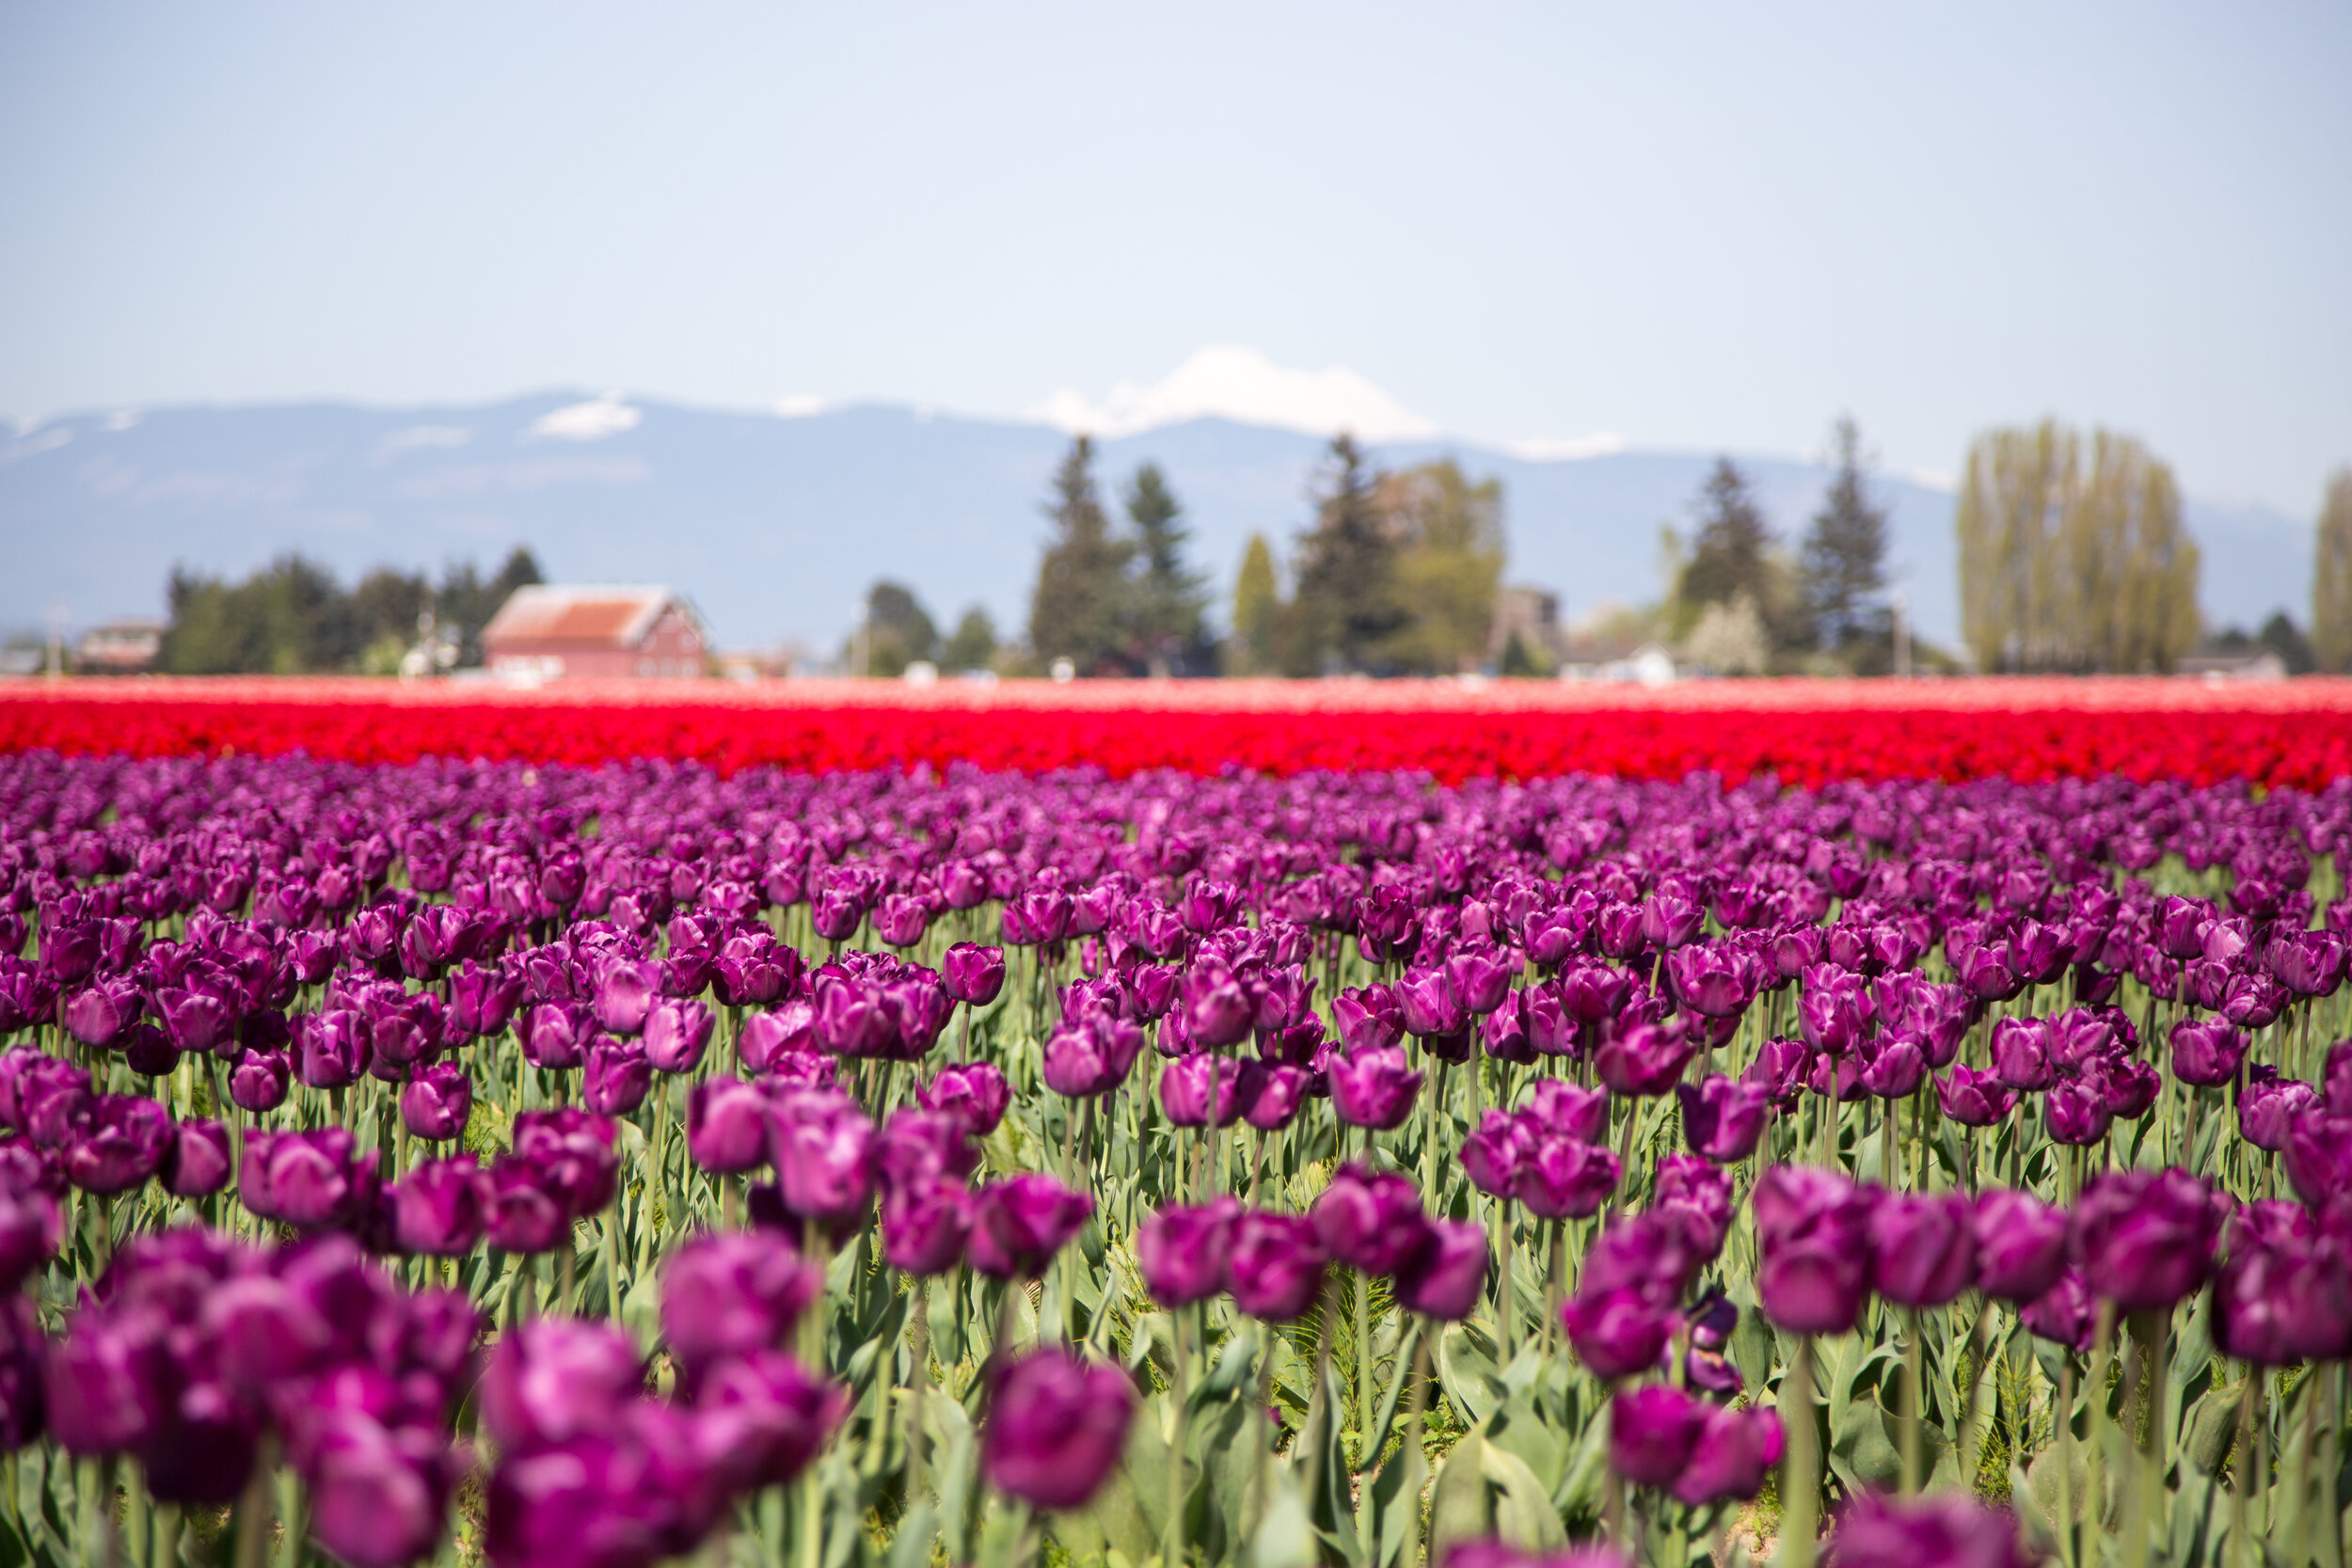 The Skagit Valley Tulip Festival draws people from all over the world and is held from April 1-30.